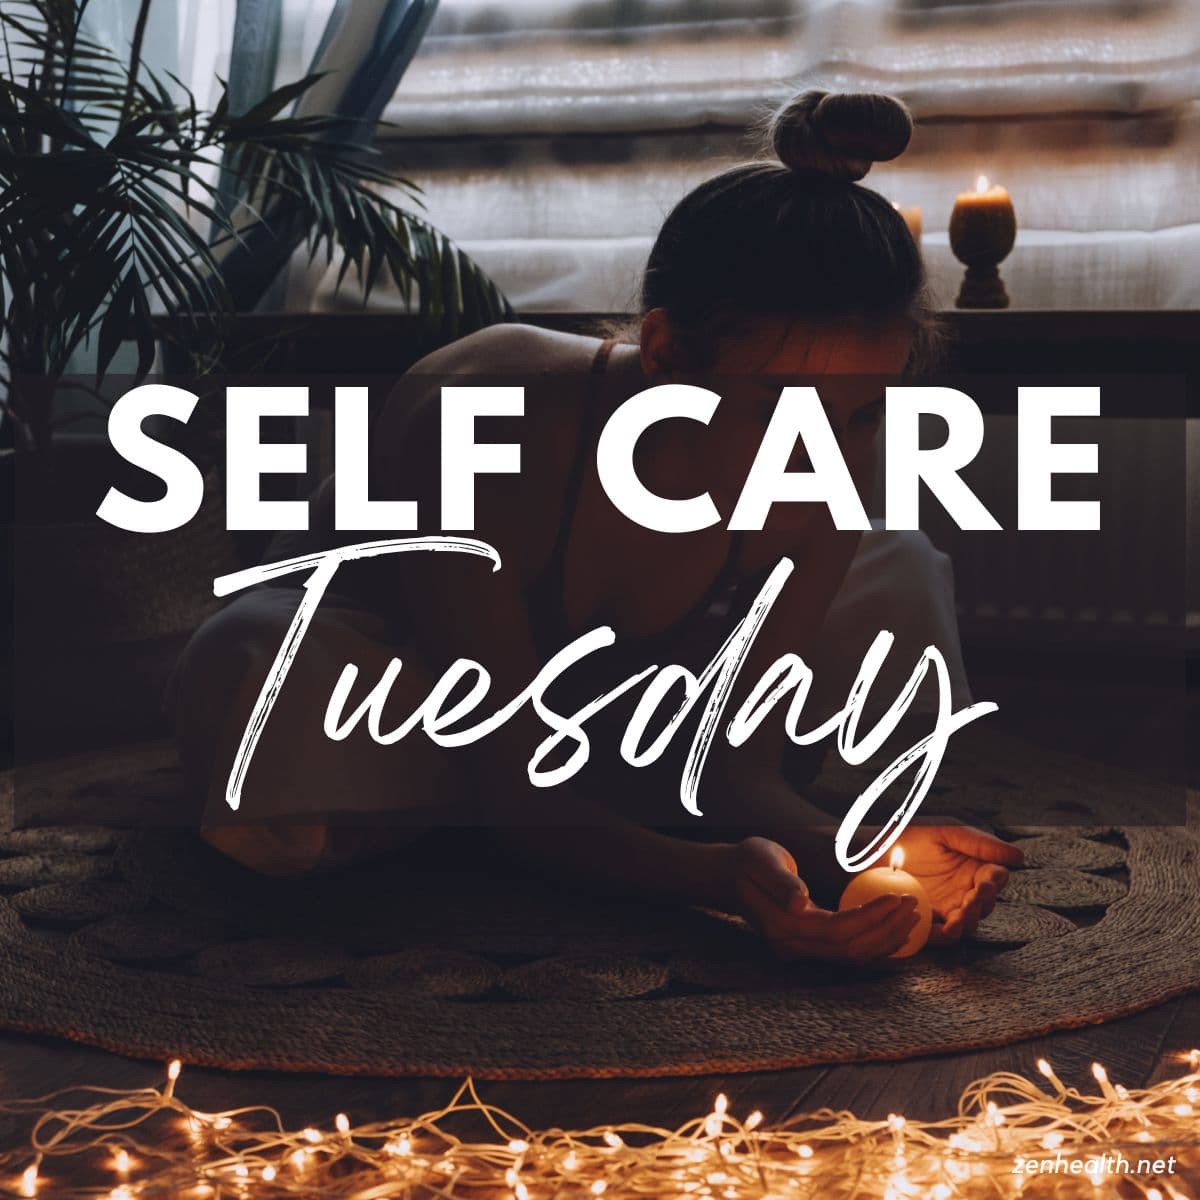 20 Self Care Tuesday Tips to Take Care of Yourself